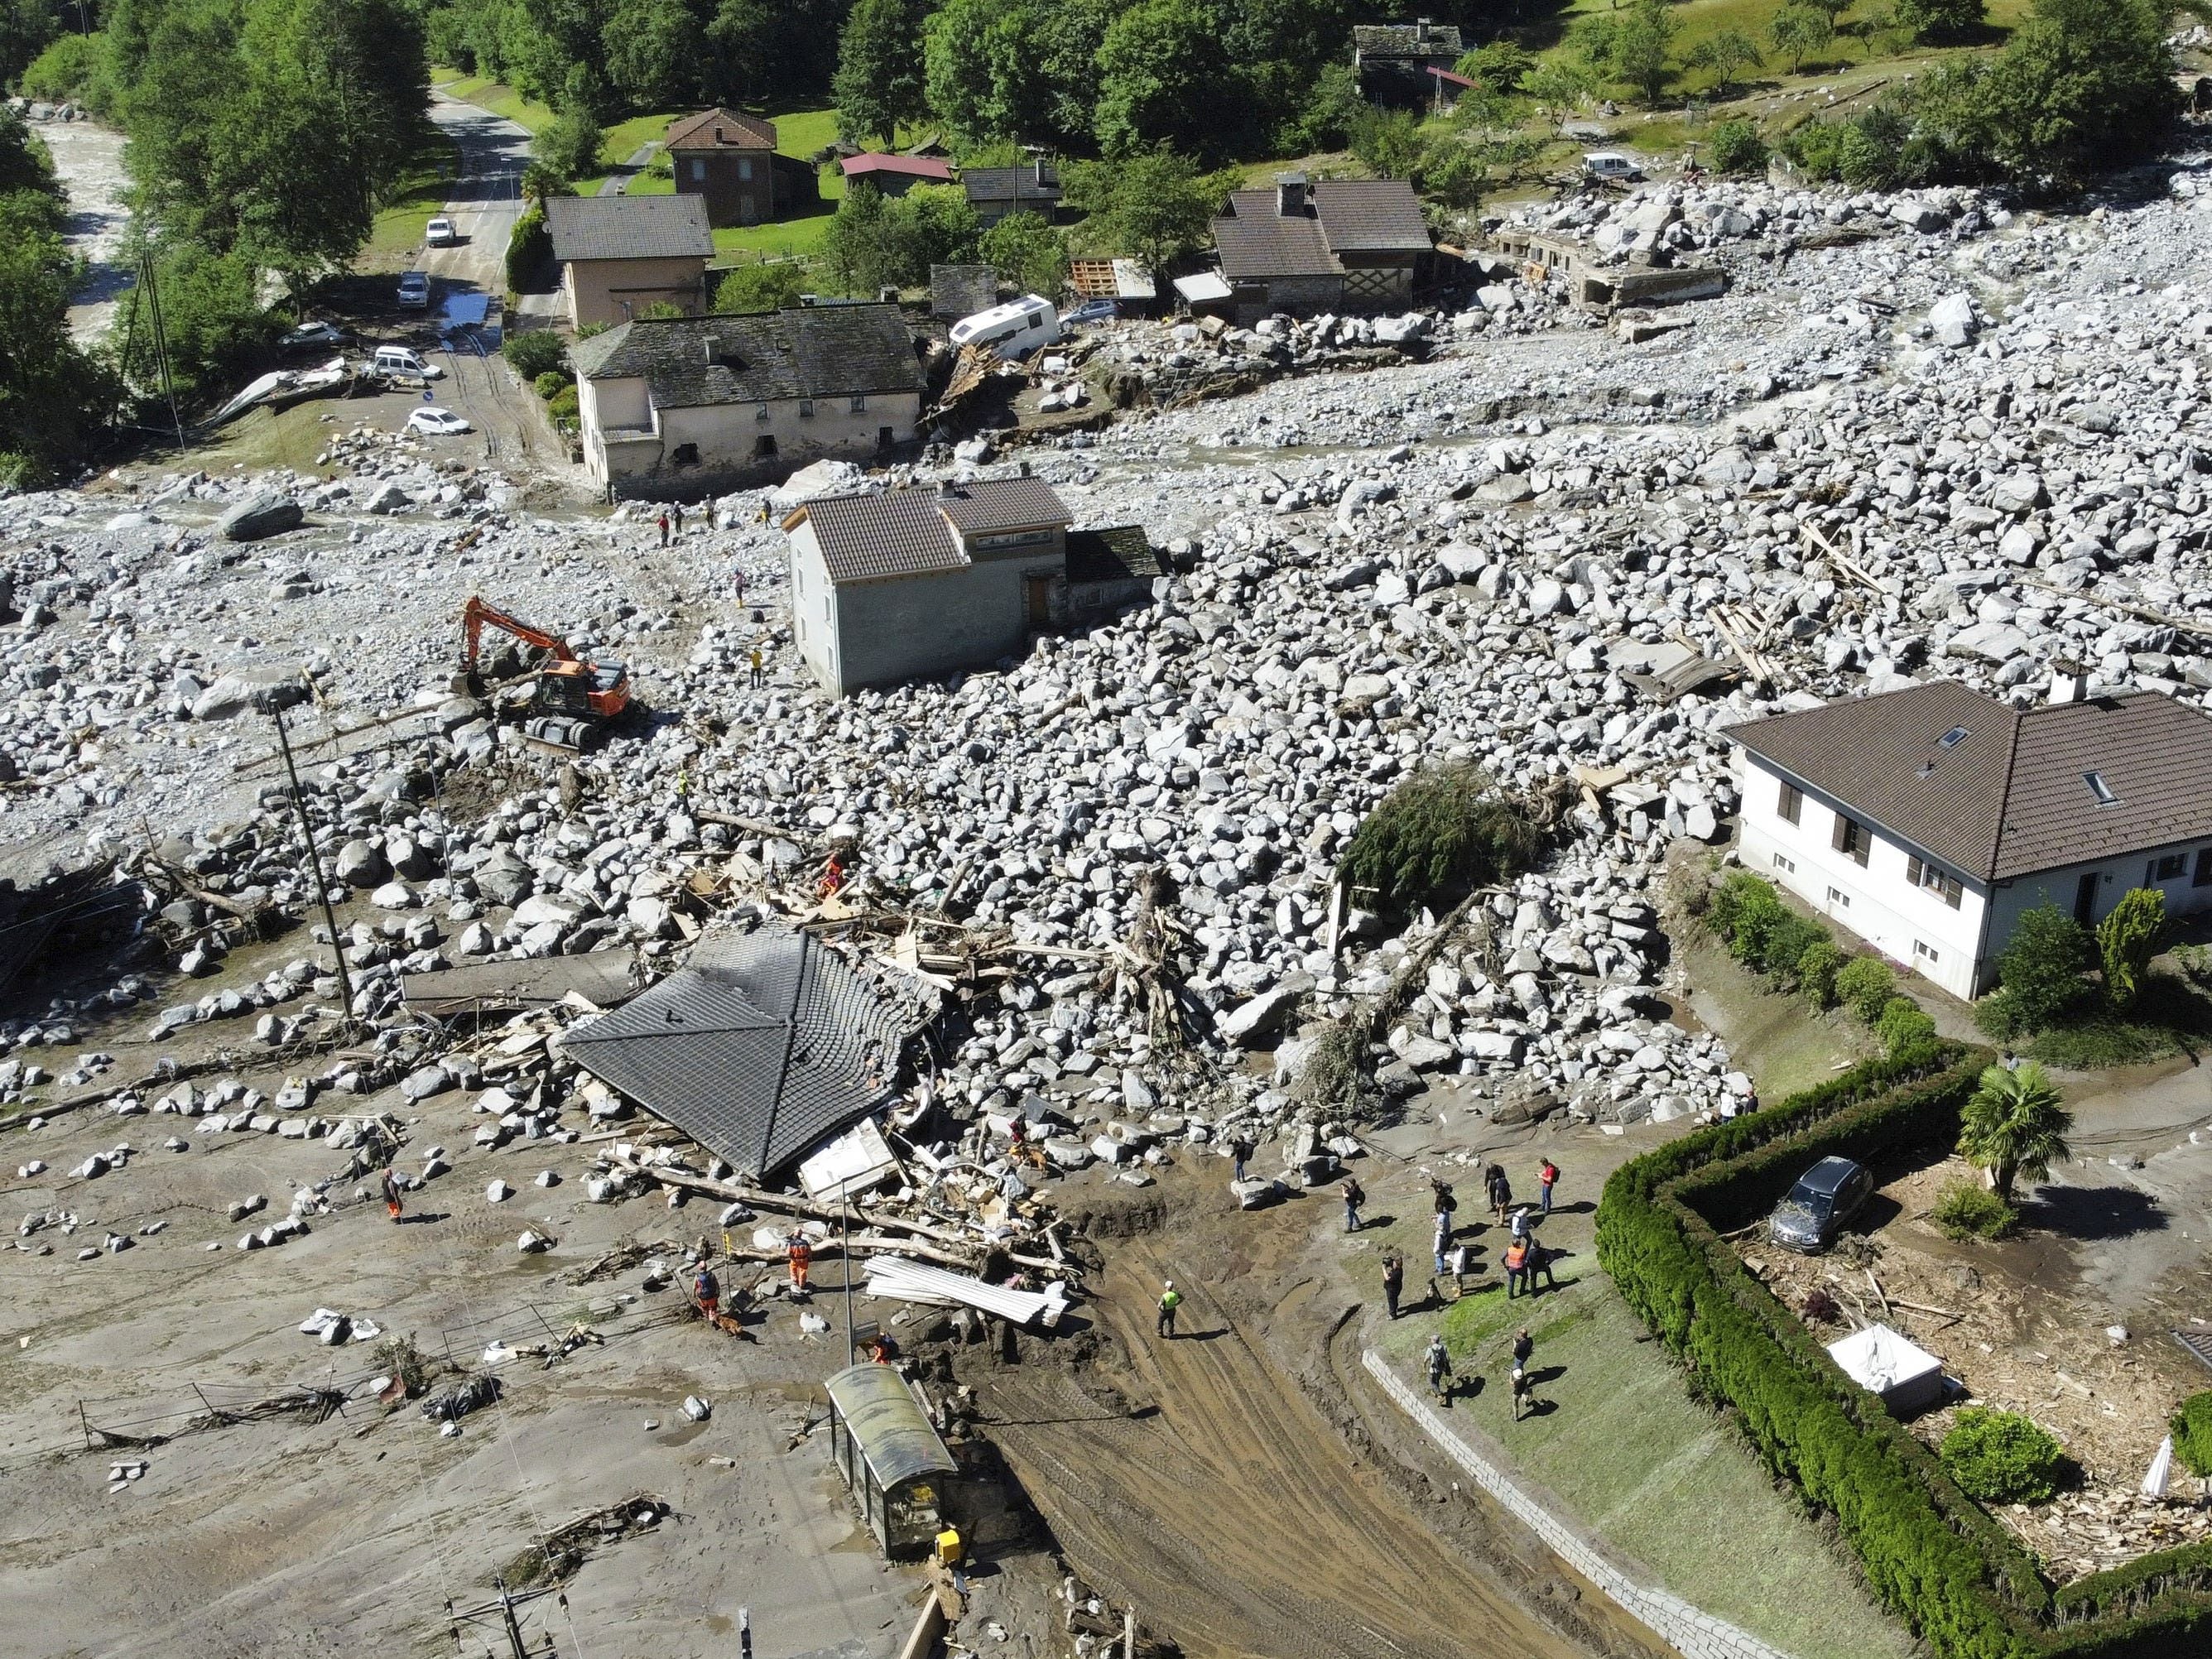 Three missing after landslide in Swiss Alps as heavy rains cause flash floods